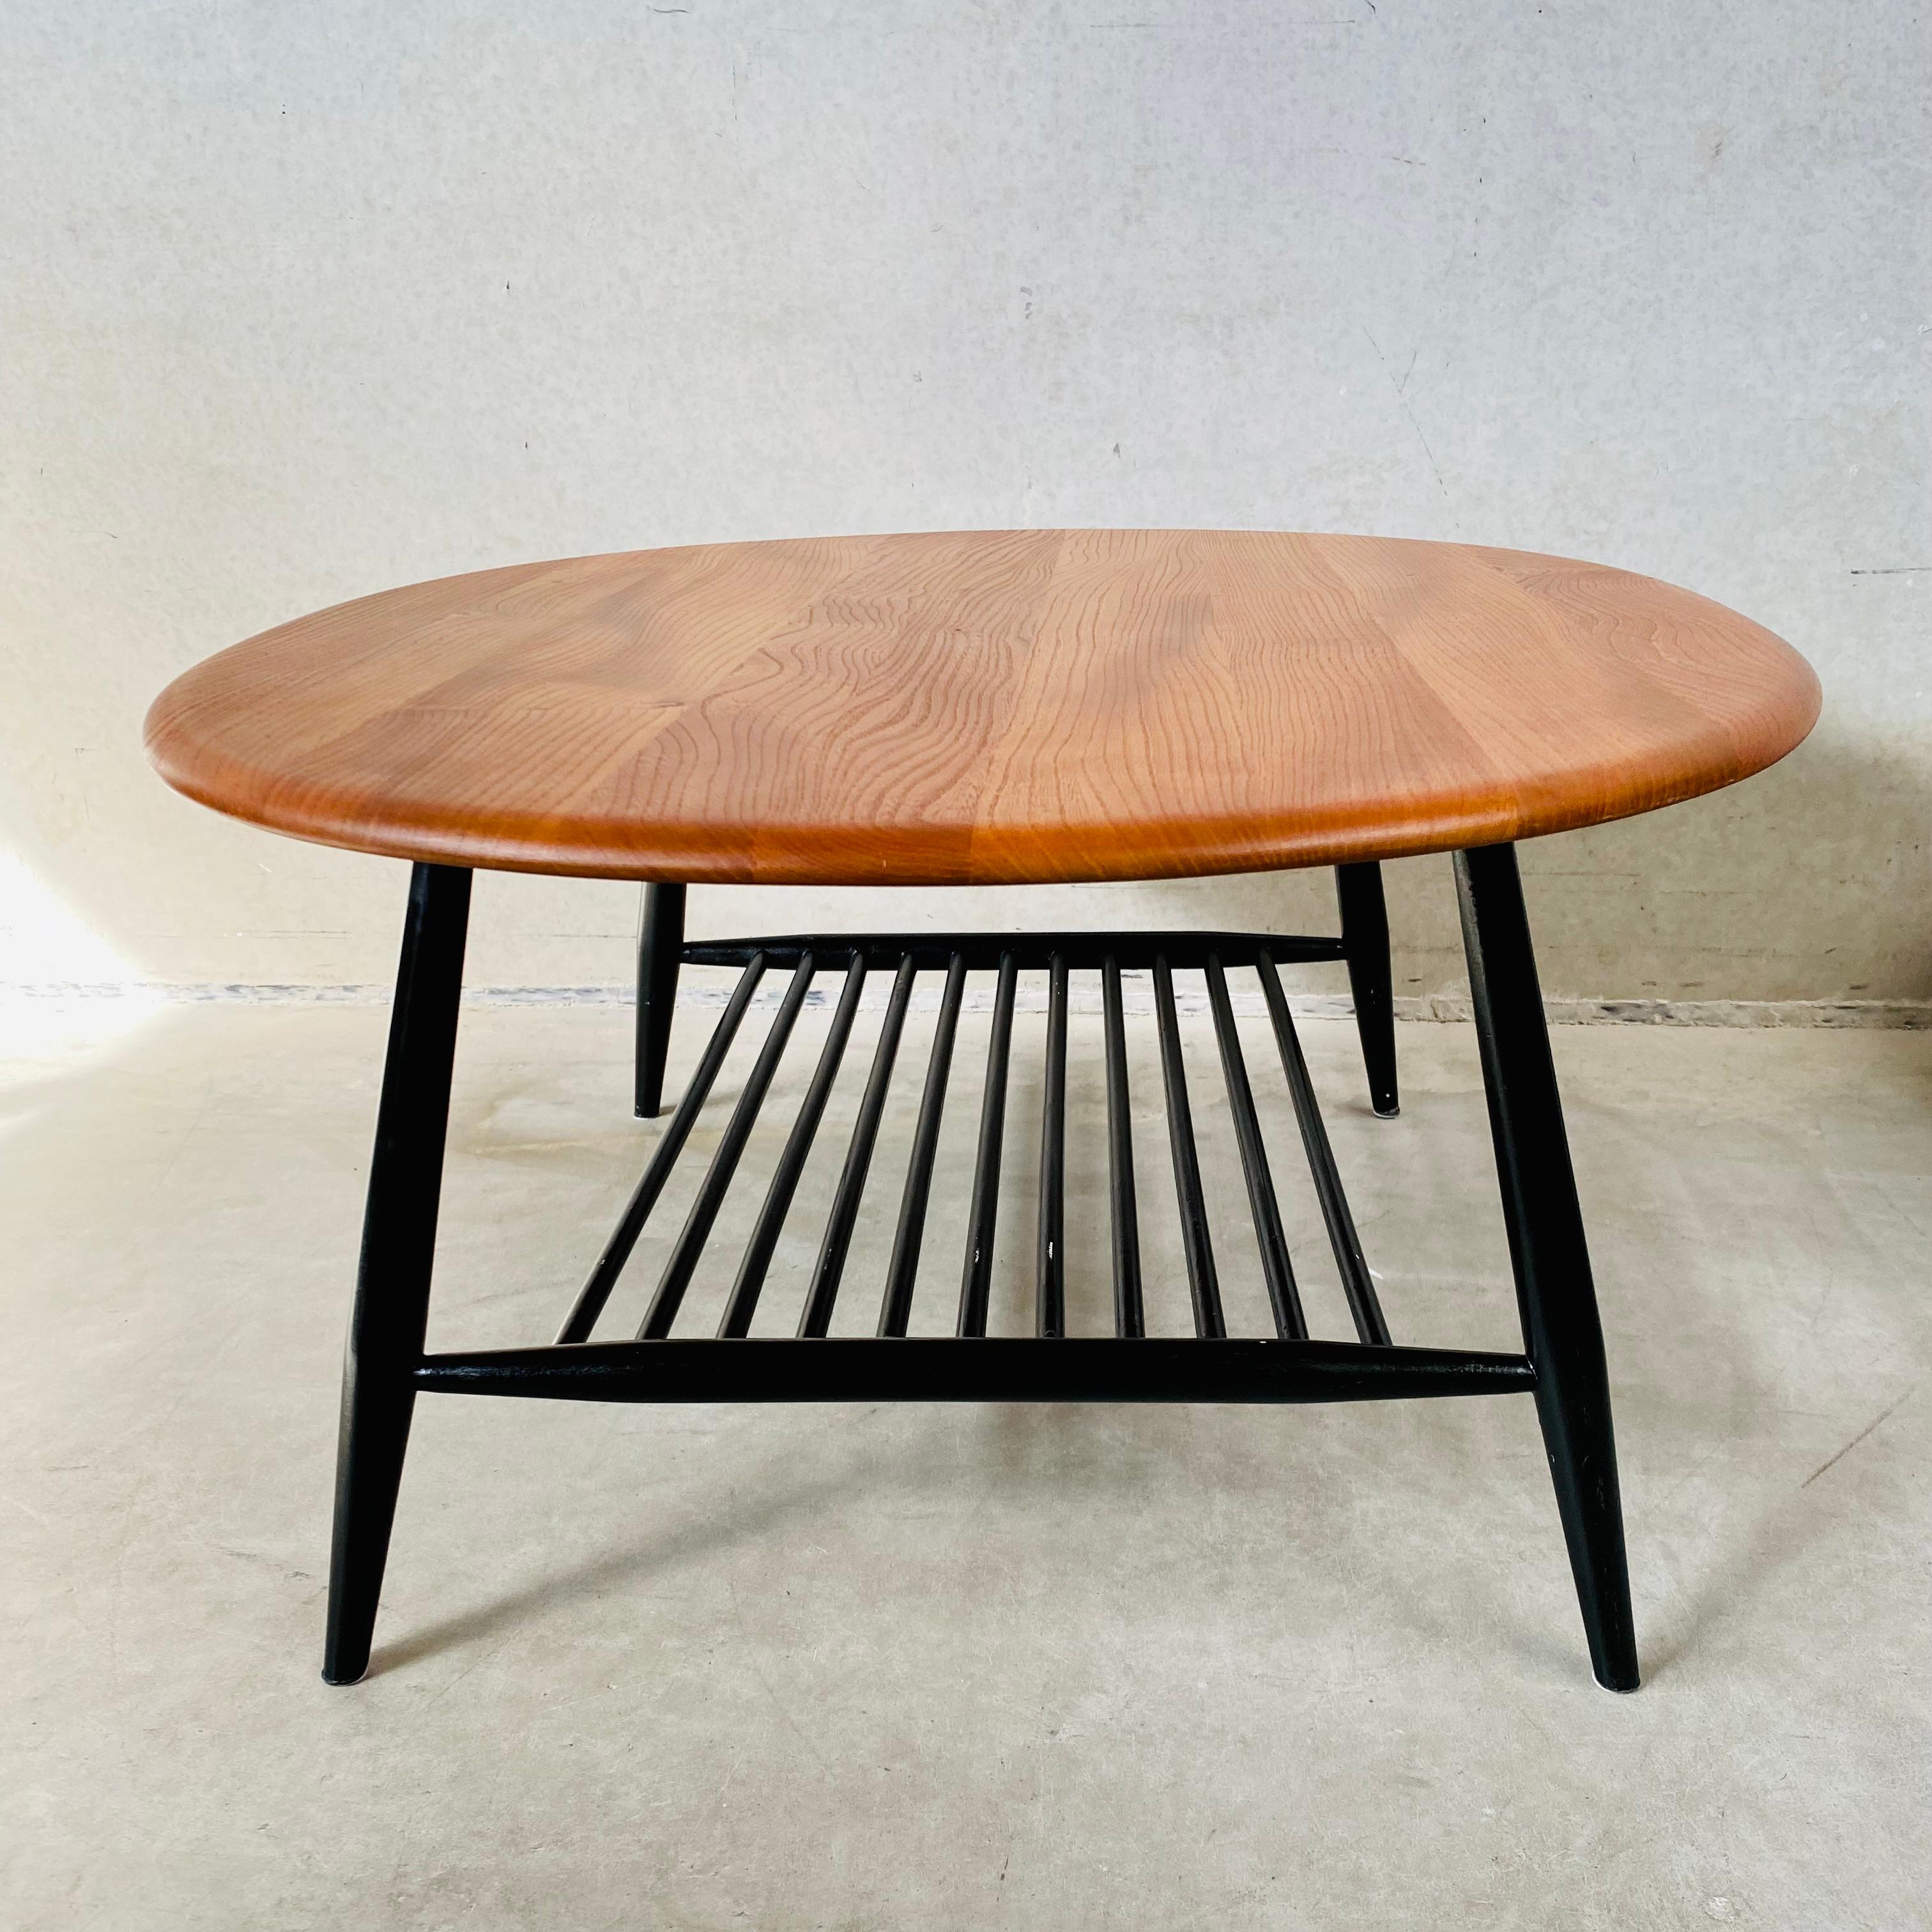 Introducing the exquisite large oval coffee table by Lucian Randolph Ercolani for Ercol, England in the 1950s. Crafted with meticulous attention to detail, this coffee table features a stunning black lacquered solid beech base and a top made of